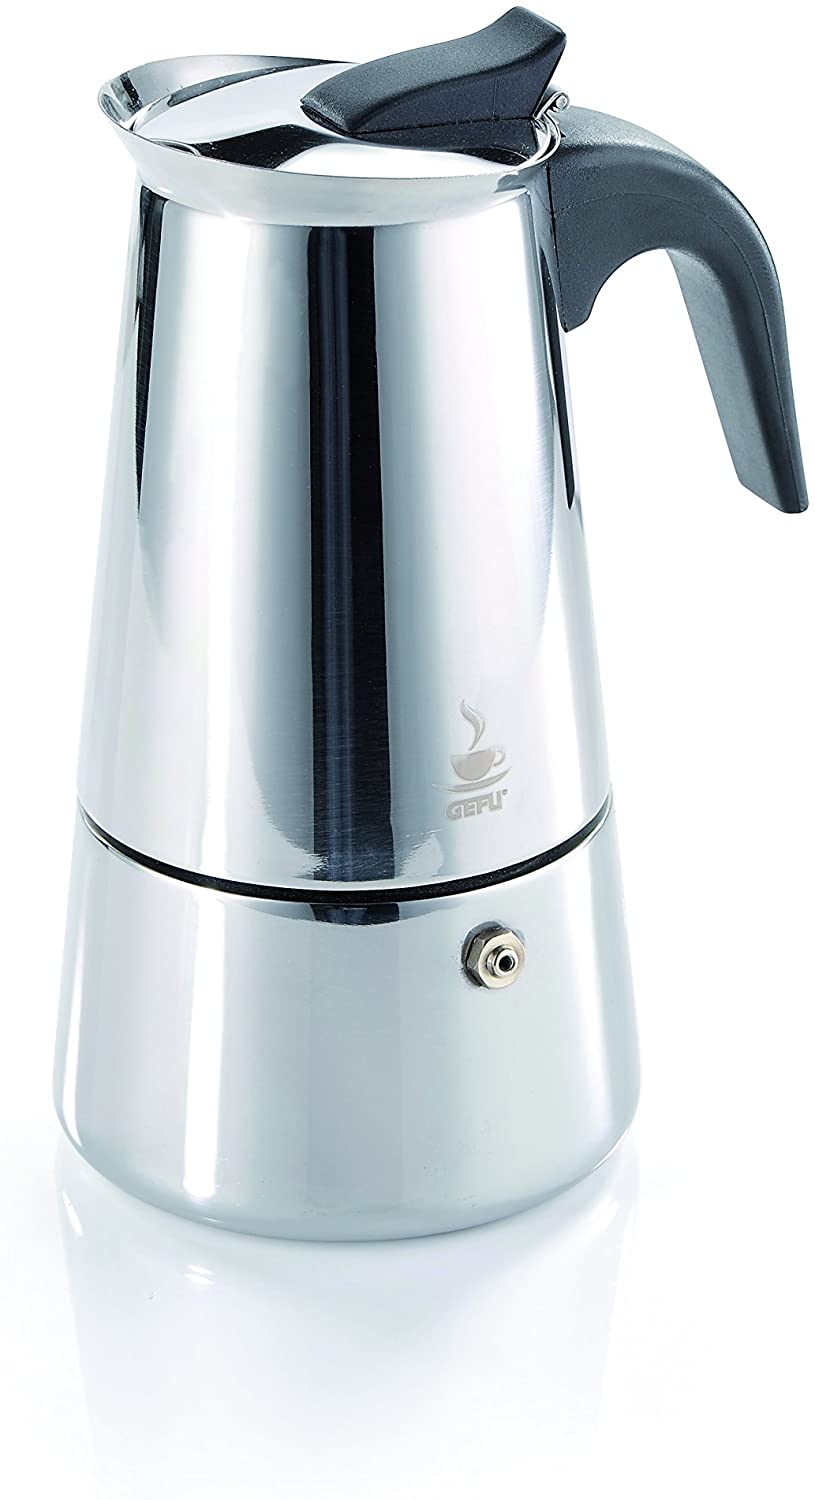 Gefu Espresso Maker Emilio, for Coffee, Suitable for Induction, Stainless Steel/ Plastic, 6 Cups, 16160